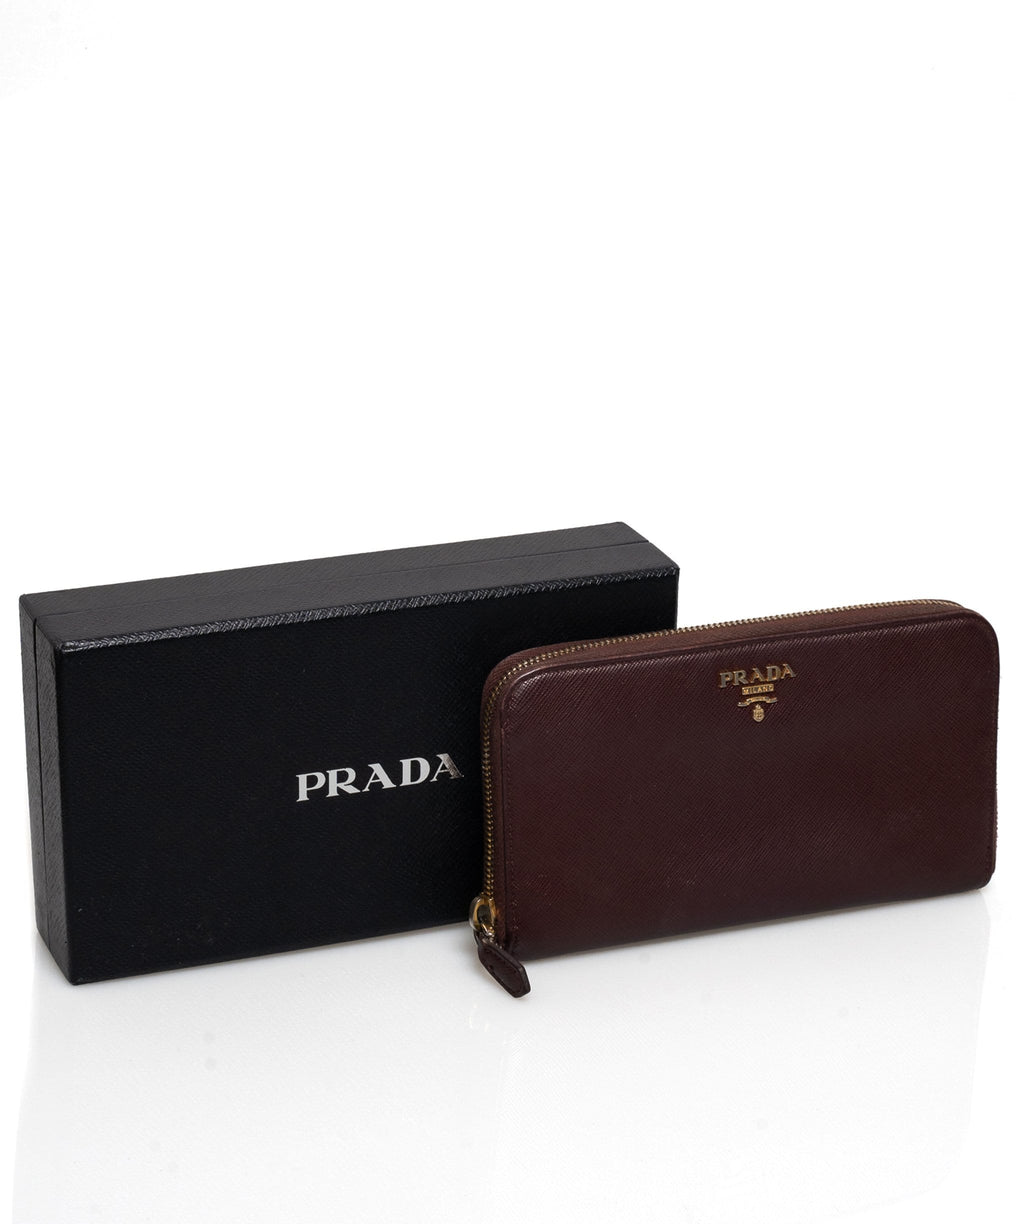 Women's Wallets And Card Holders | PRADA